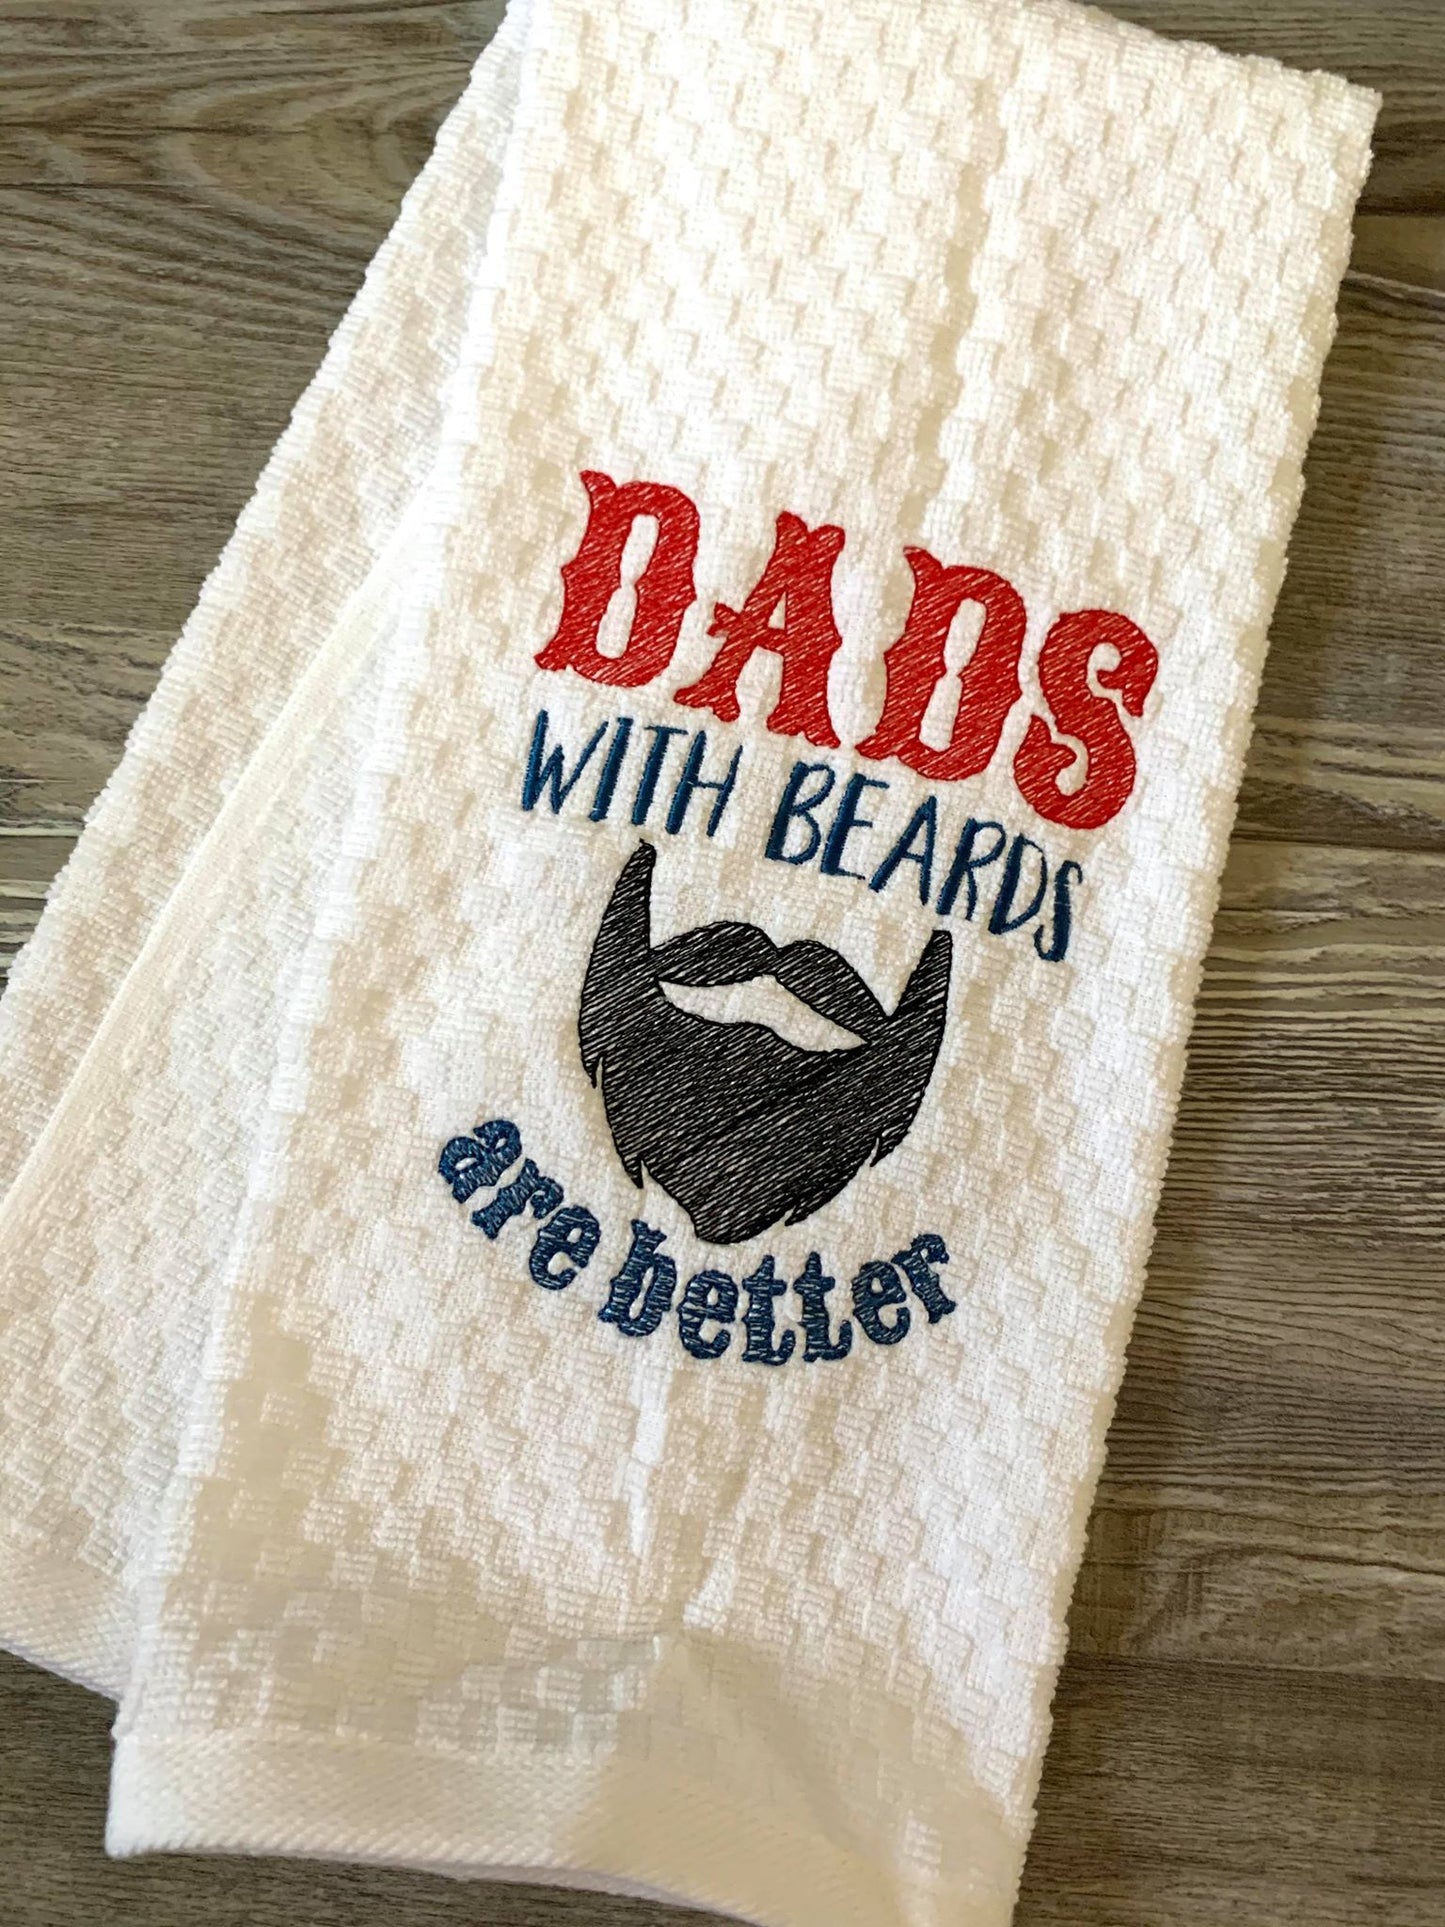 Dads with beards are better - 2 Sizes - Digital Embroidery Design